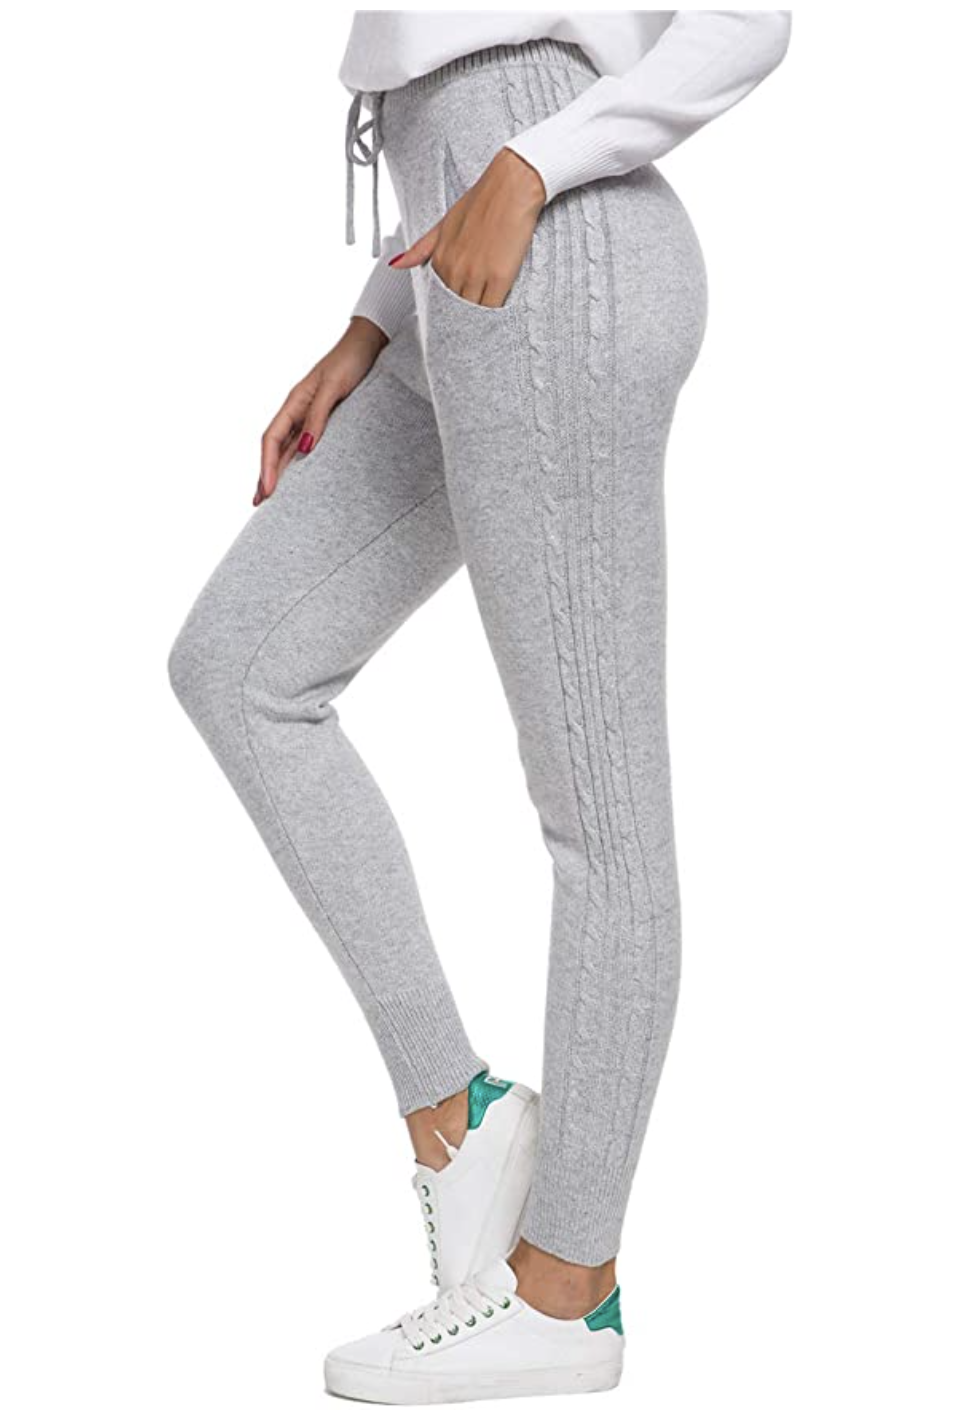 https://www.usmagazine.com/wp-content/uploads/2020/12/DAIMIDY-Womens-Cashmere-Jogger-Pants.png?w=954&quality=86&strip=all